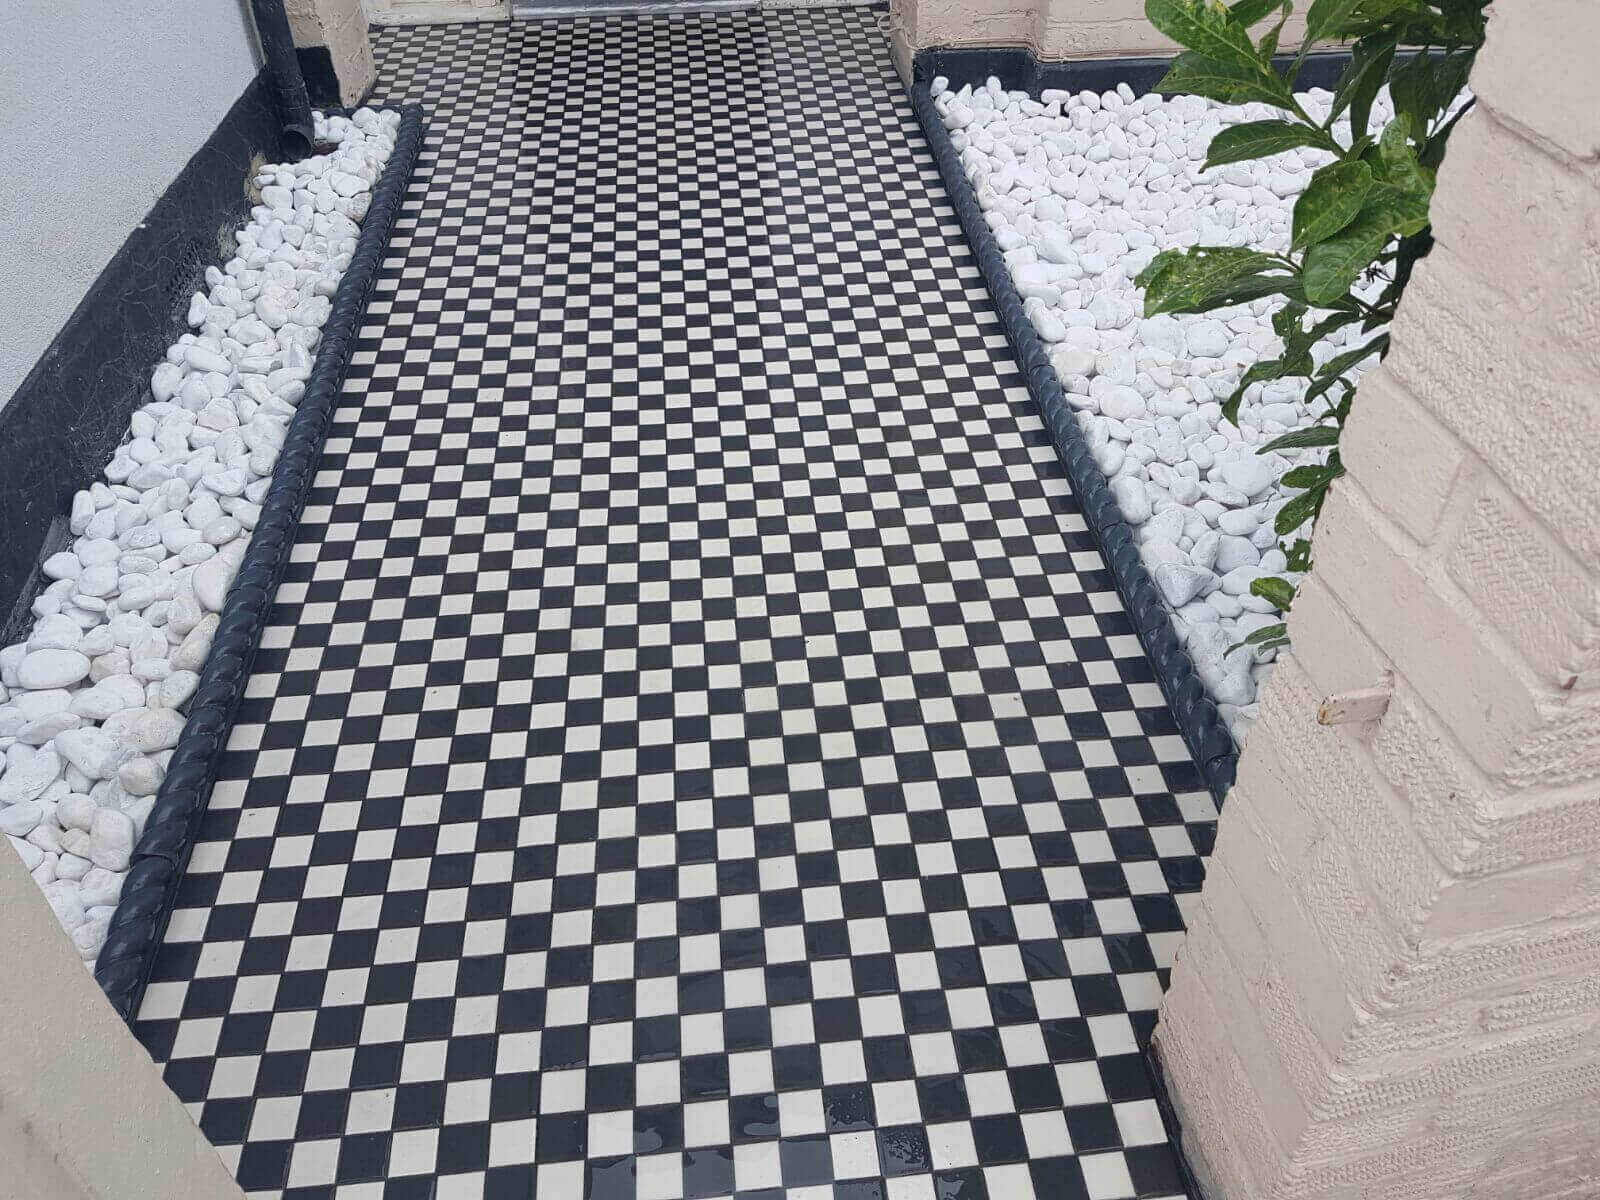  Victorian Pathway Tile Installation Contractor Shirley, London CR0